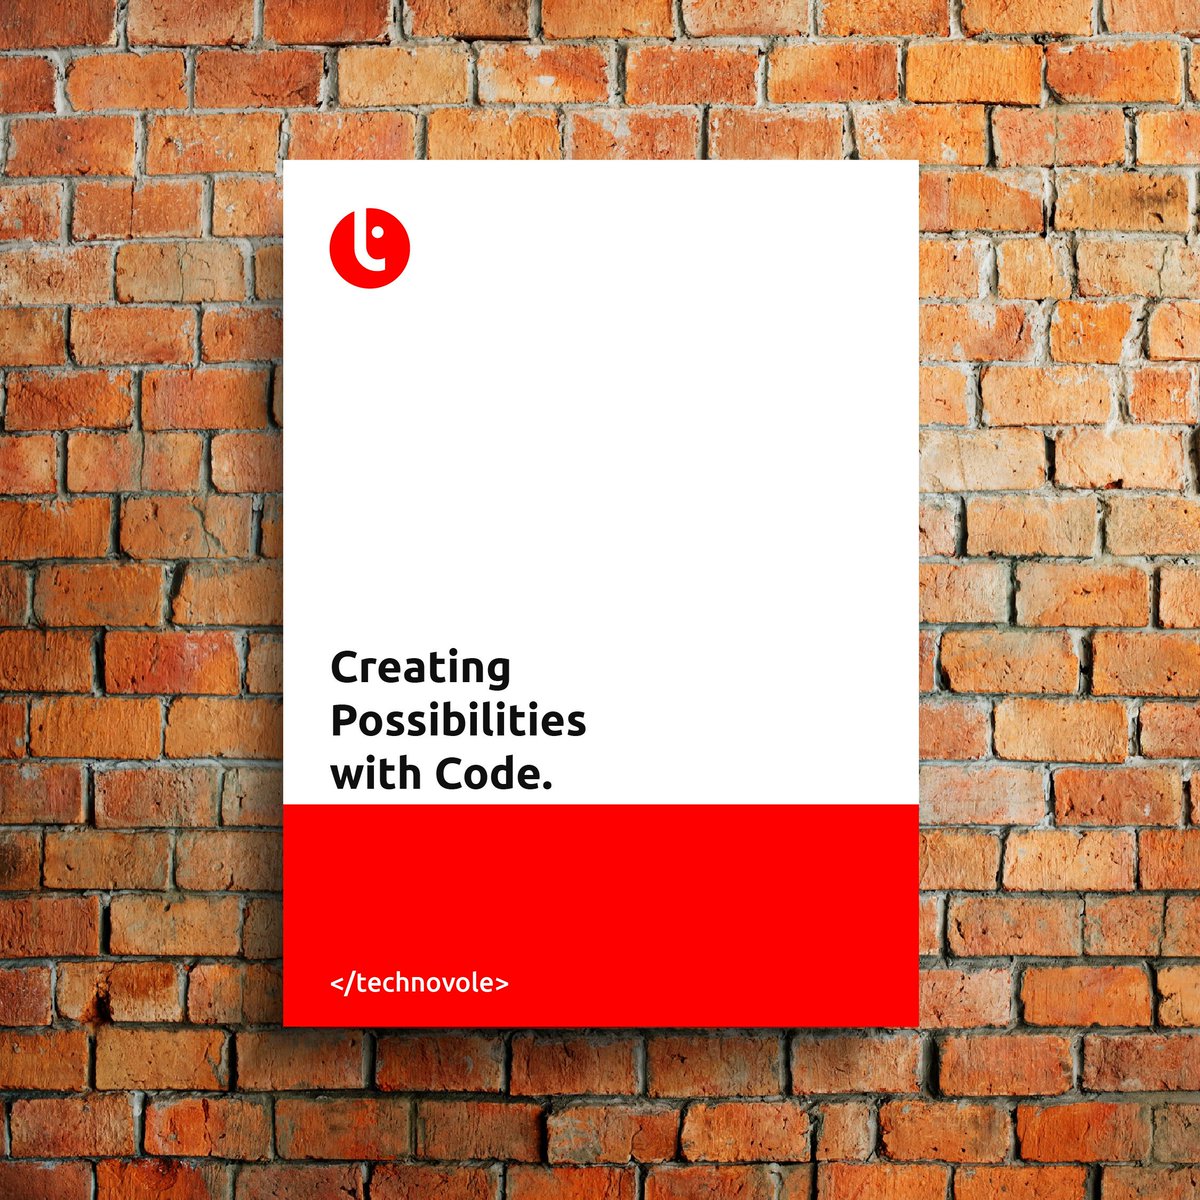 Unlocking the potential of code to create endless possibilities! Are you looking for a tech company to bring your ideas to life? Let's connect and explore the possibilities together.
technovole.com/hire-technovole.
#software #creatingpossibilities #digitaltransformation #tech #erp